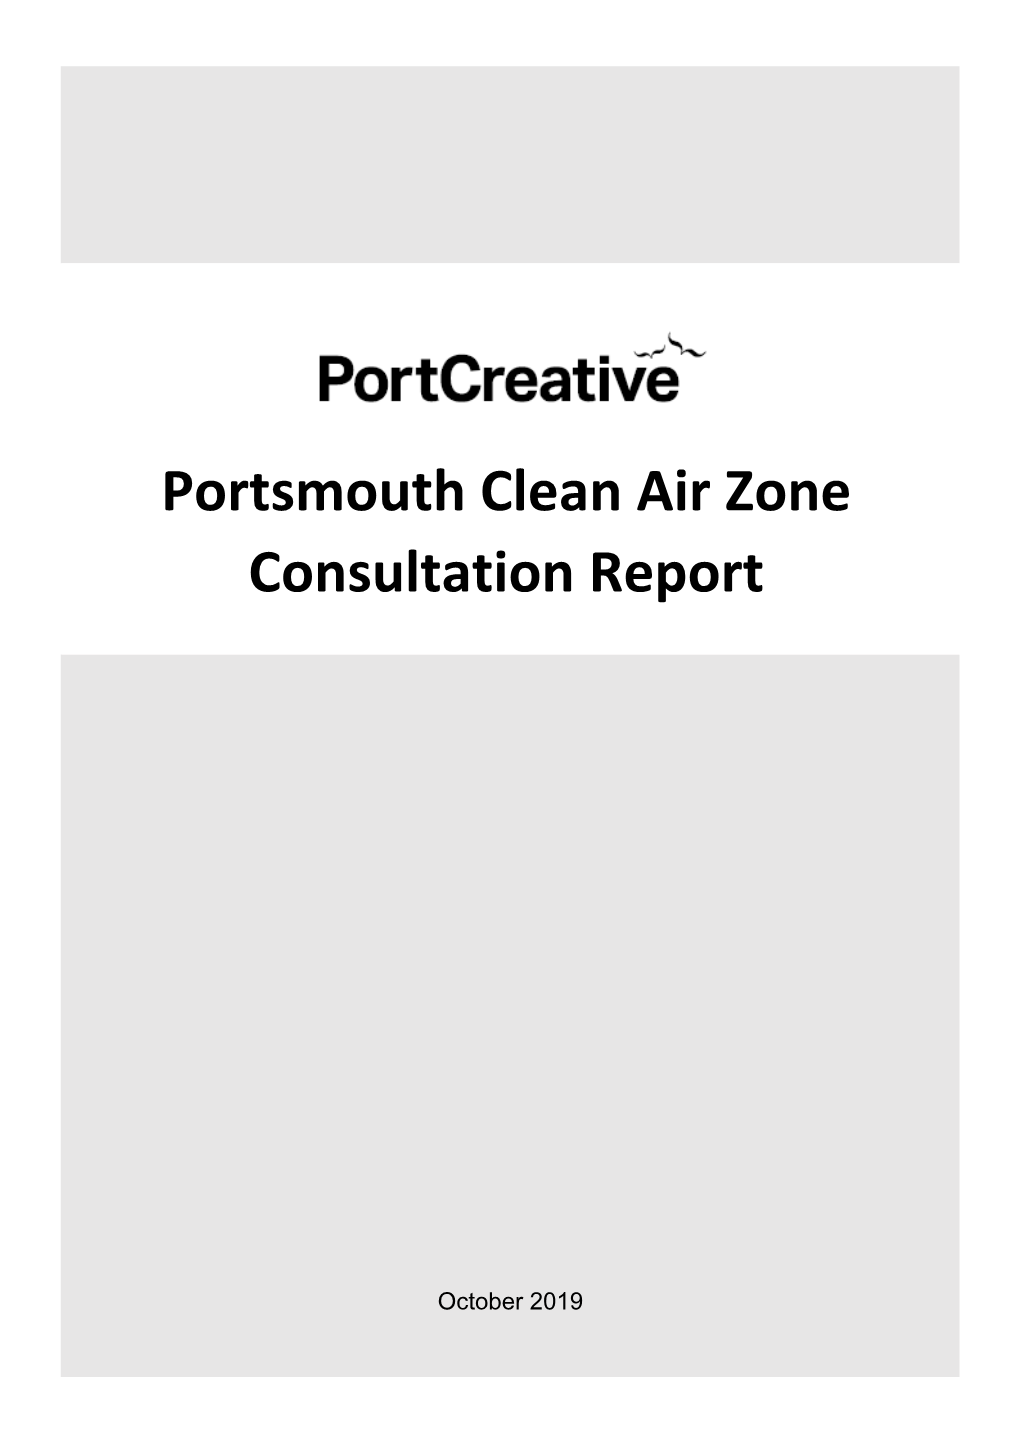 Portsmouth Clean Air Zone Consultation Report 2019